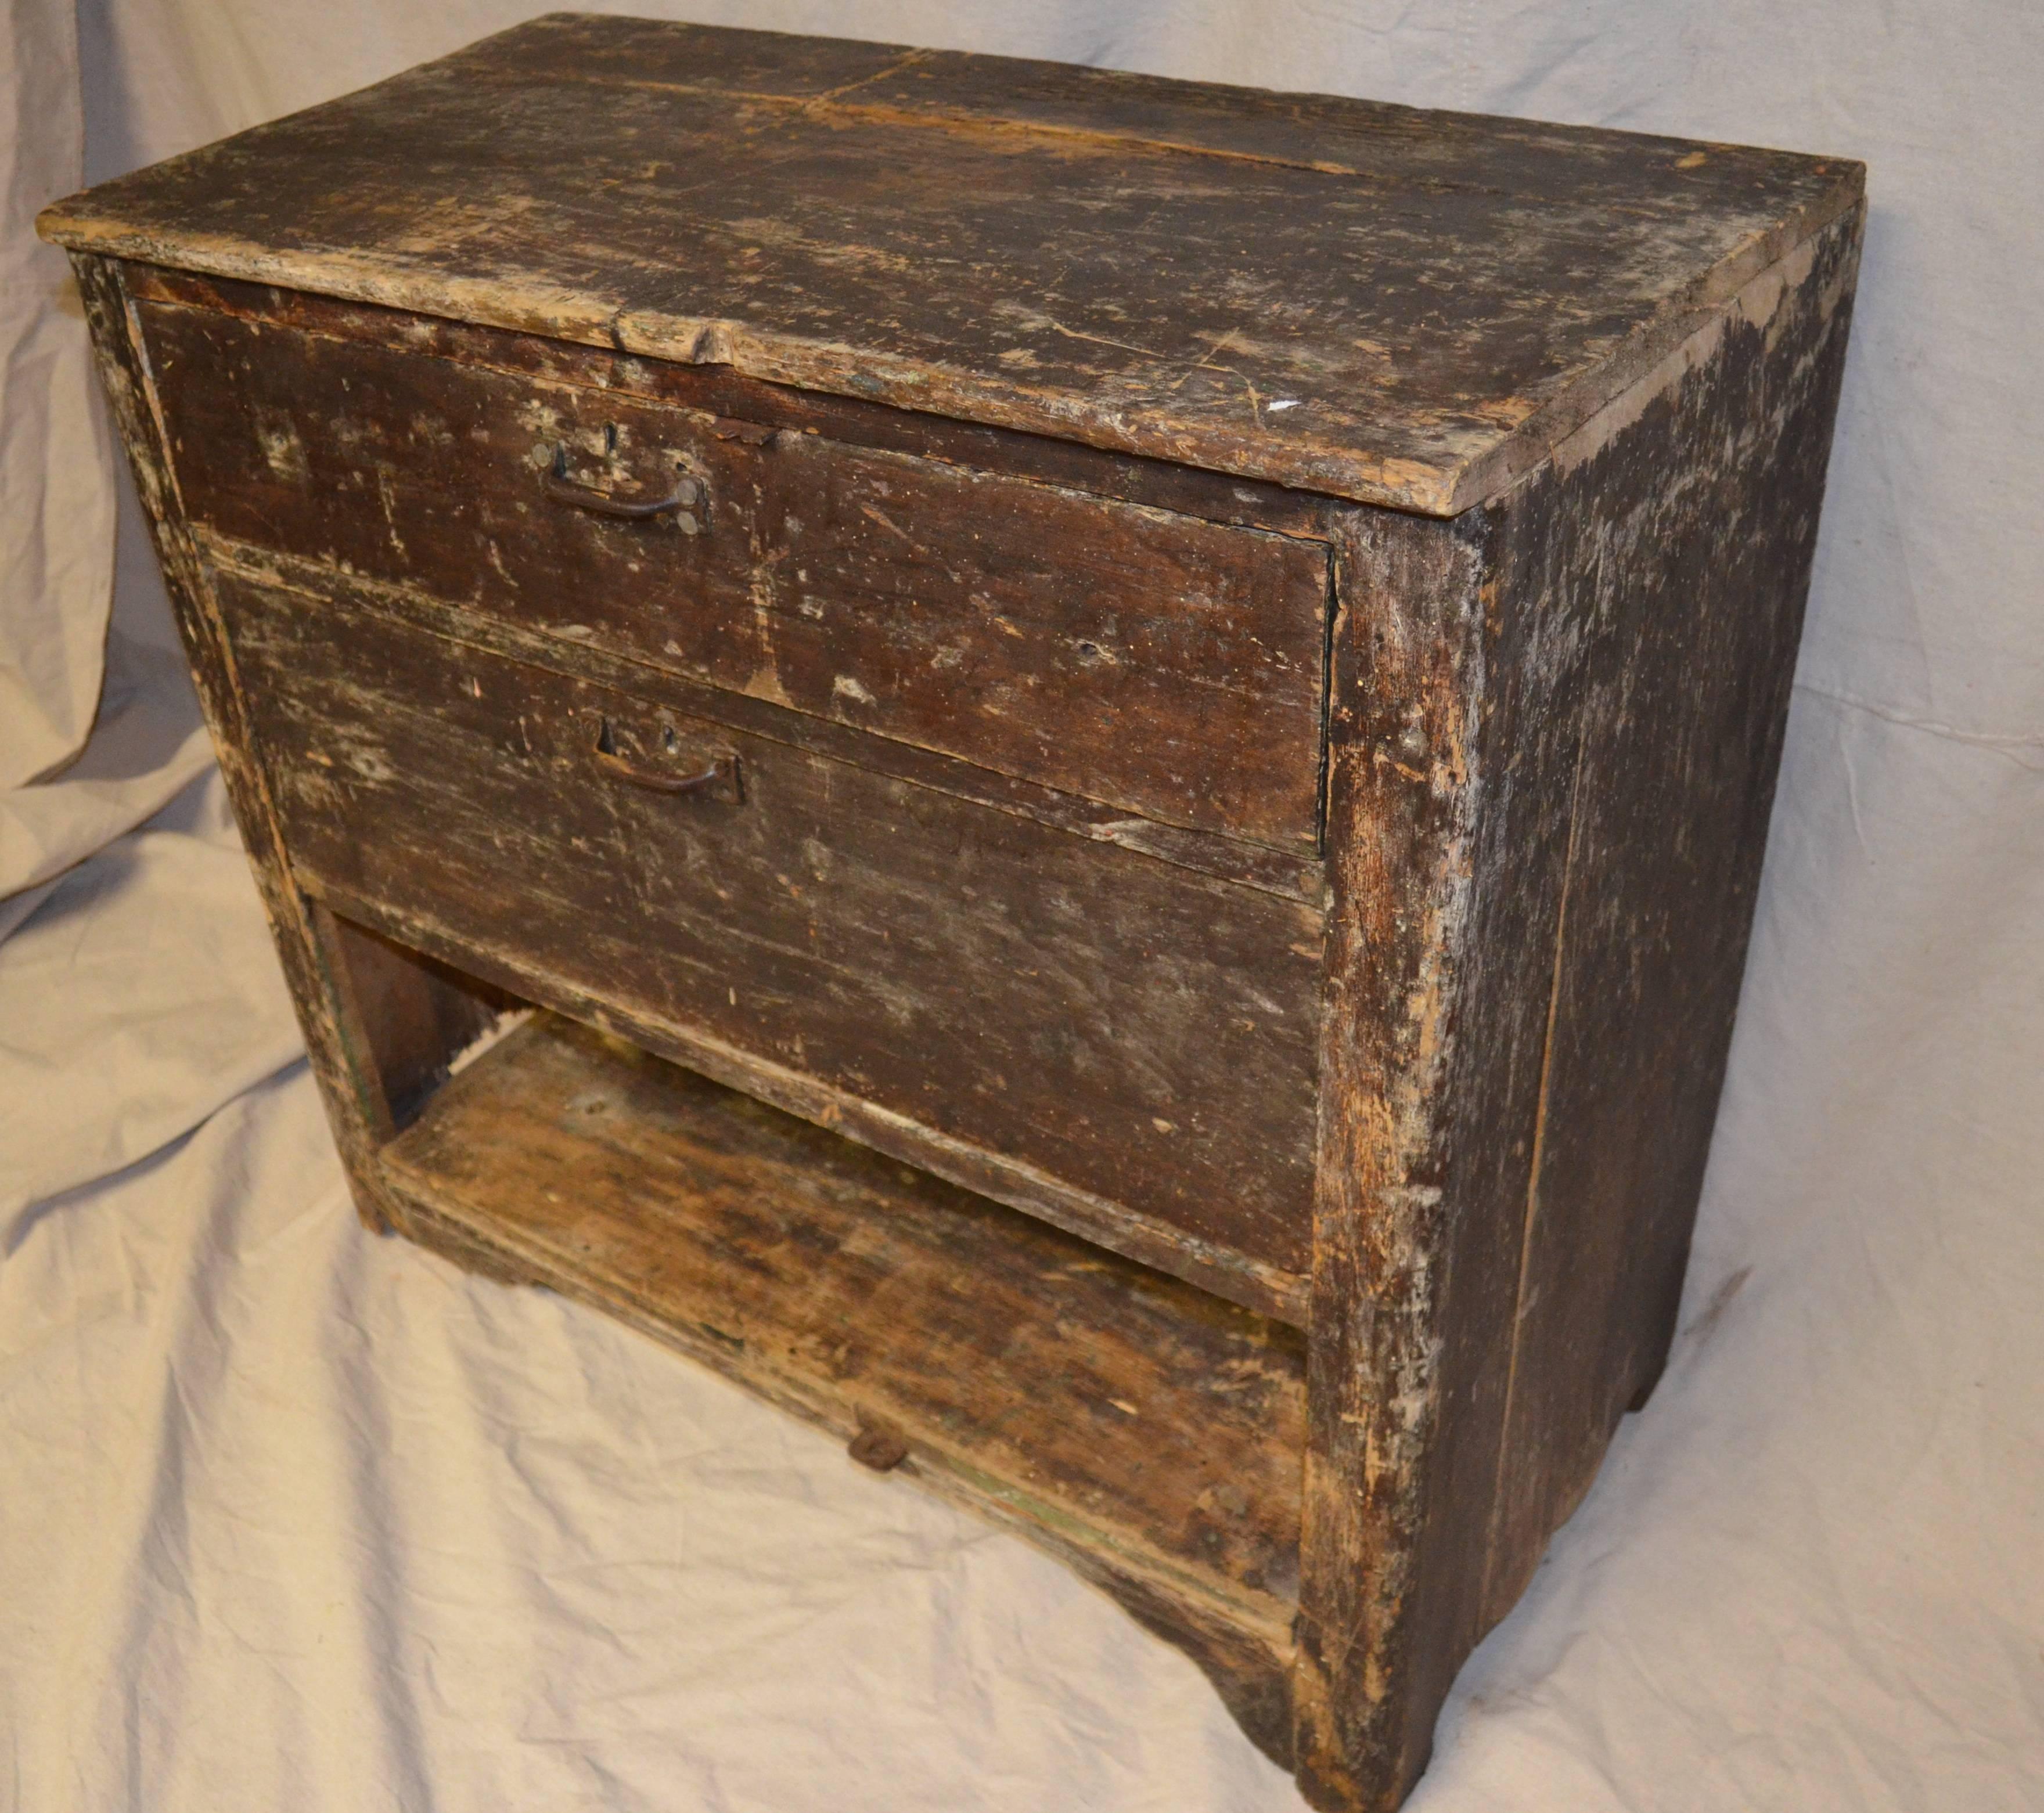 Primitive wooden cabinet with two drawers and bottom shelf. Has been reconditioned, cleaned and sealed. If you're into primitive, you'll love this piece for bathroom, hallway, entranceway, lamp table.